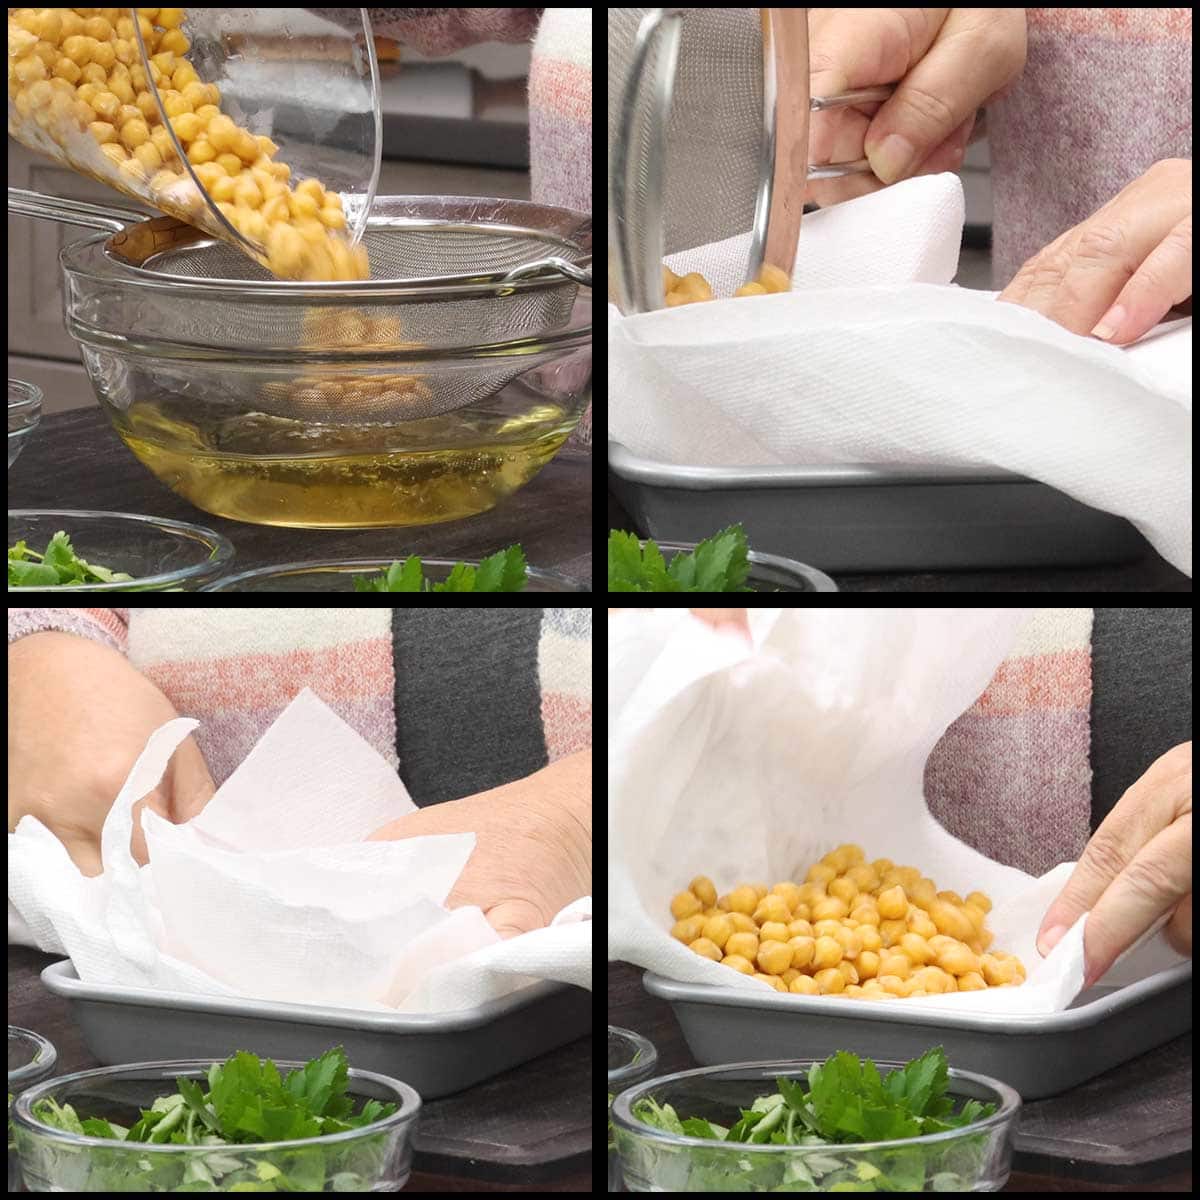 straining and drying soaked chickpeas.